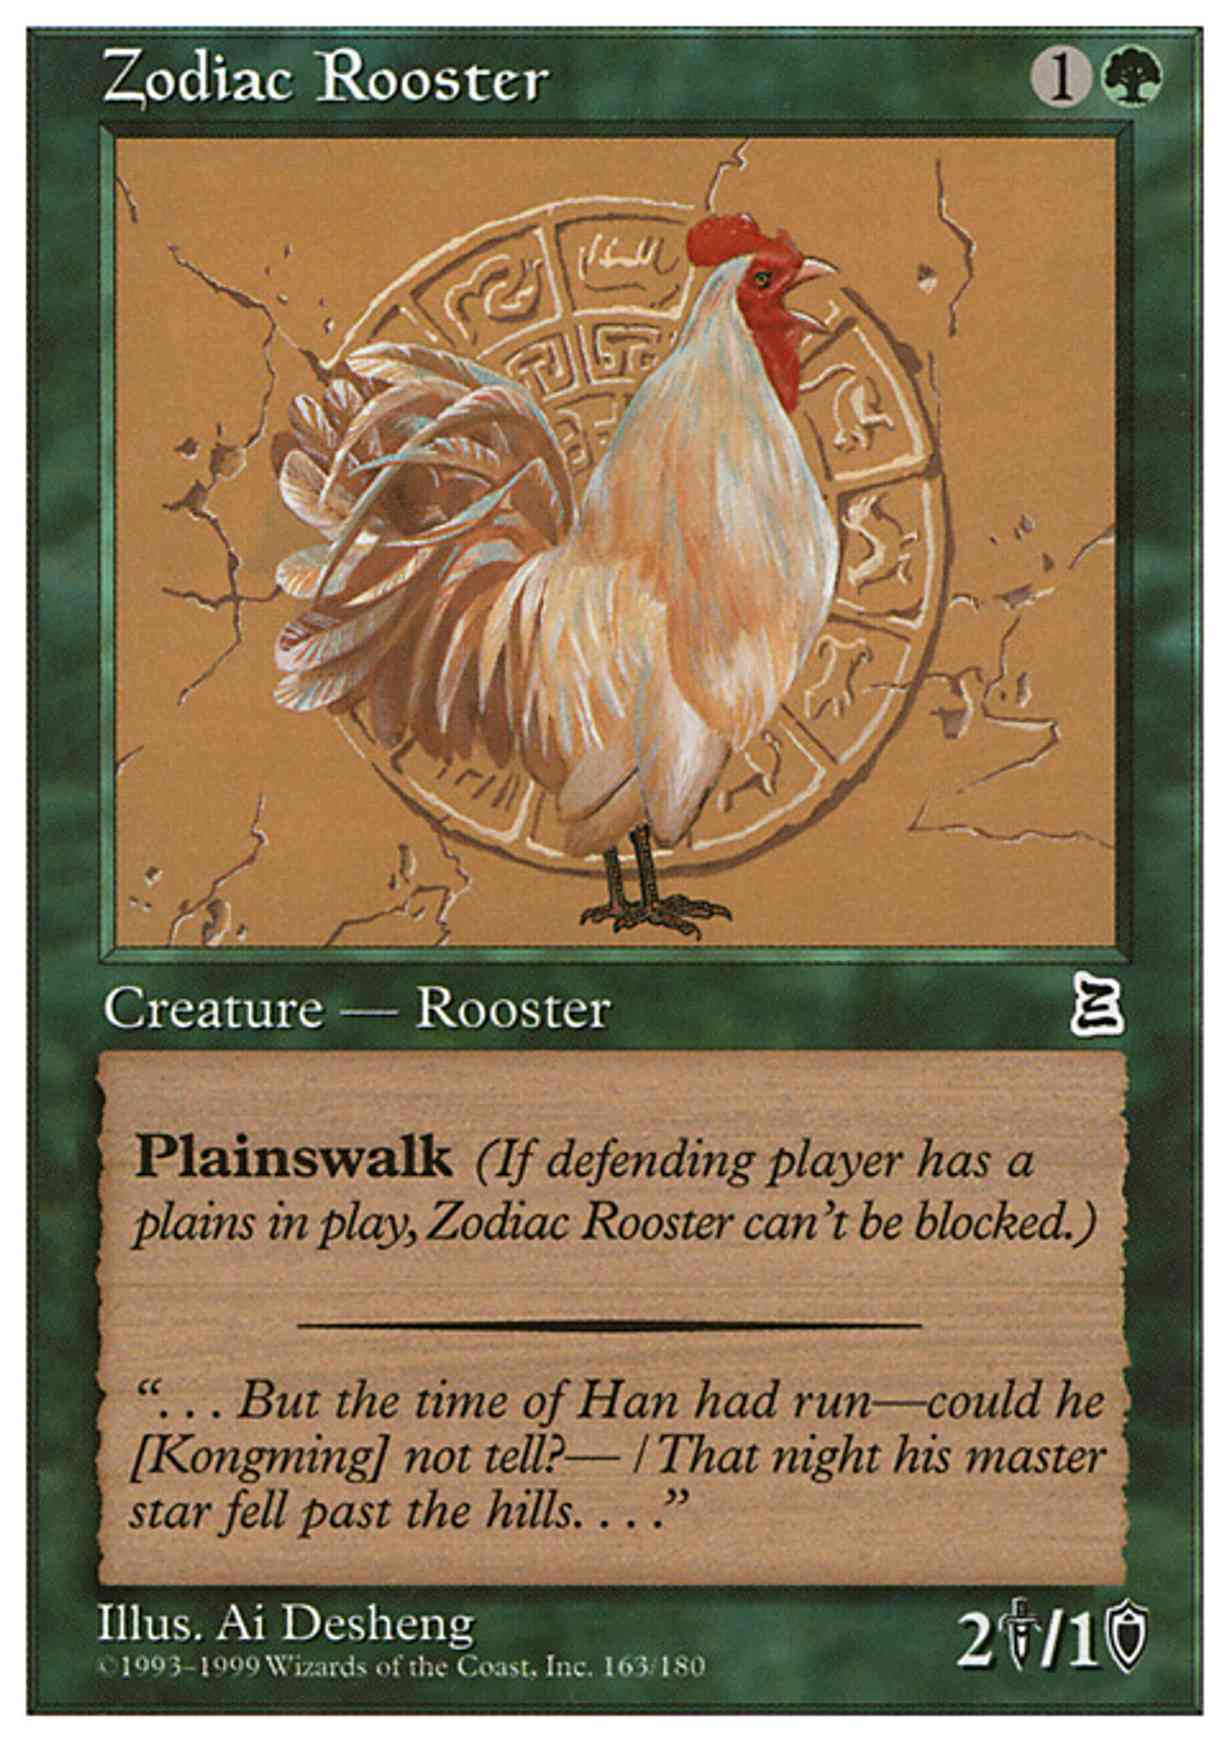 Zodiac Rooster magic card front